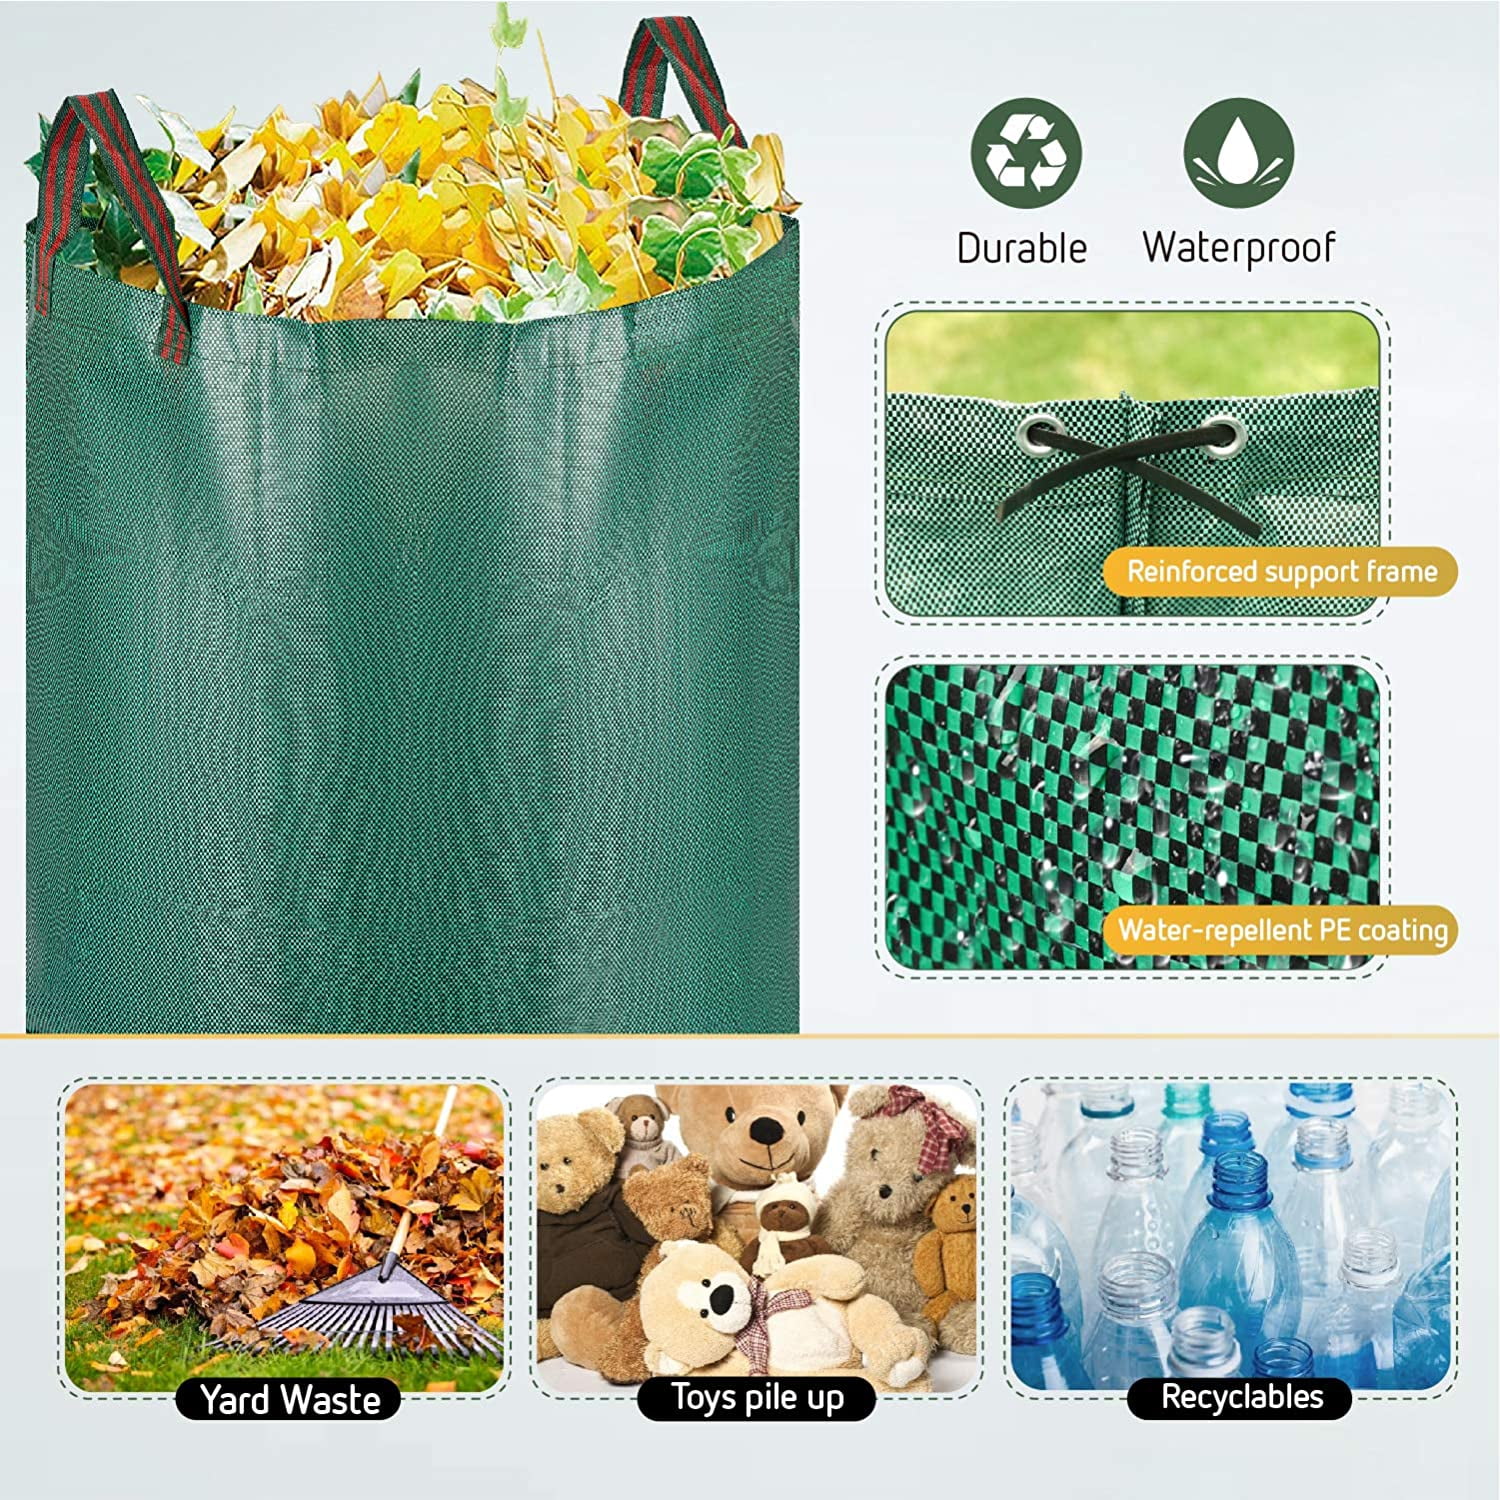 3-Pack 72 Gallon Lawn Garden Bags,Reusable Extra Large Leaf Bags Yard Waste Bags Paper Waste Management Bagster Recycling Bag Trash Bags